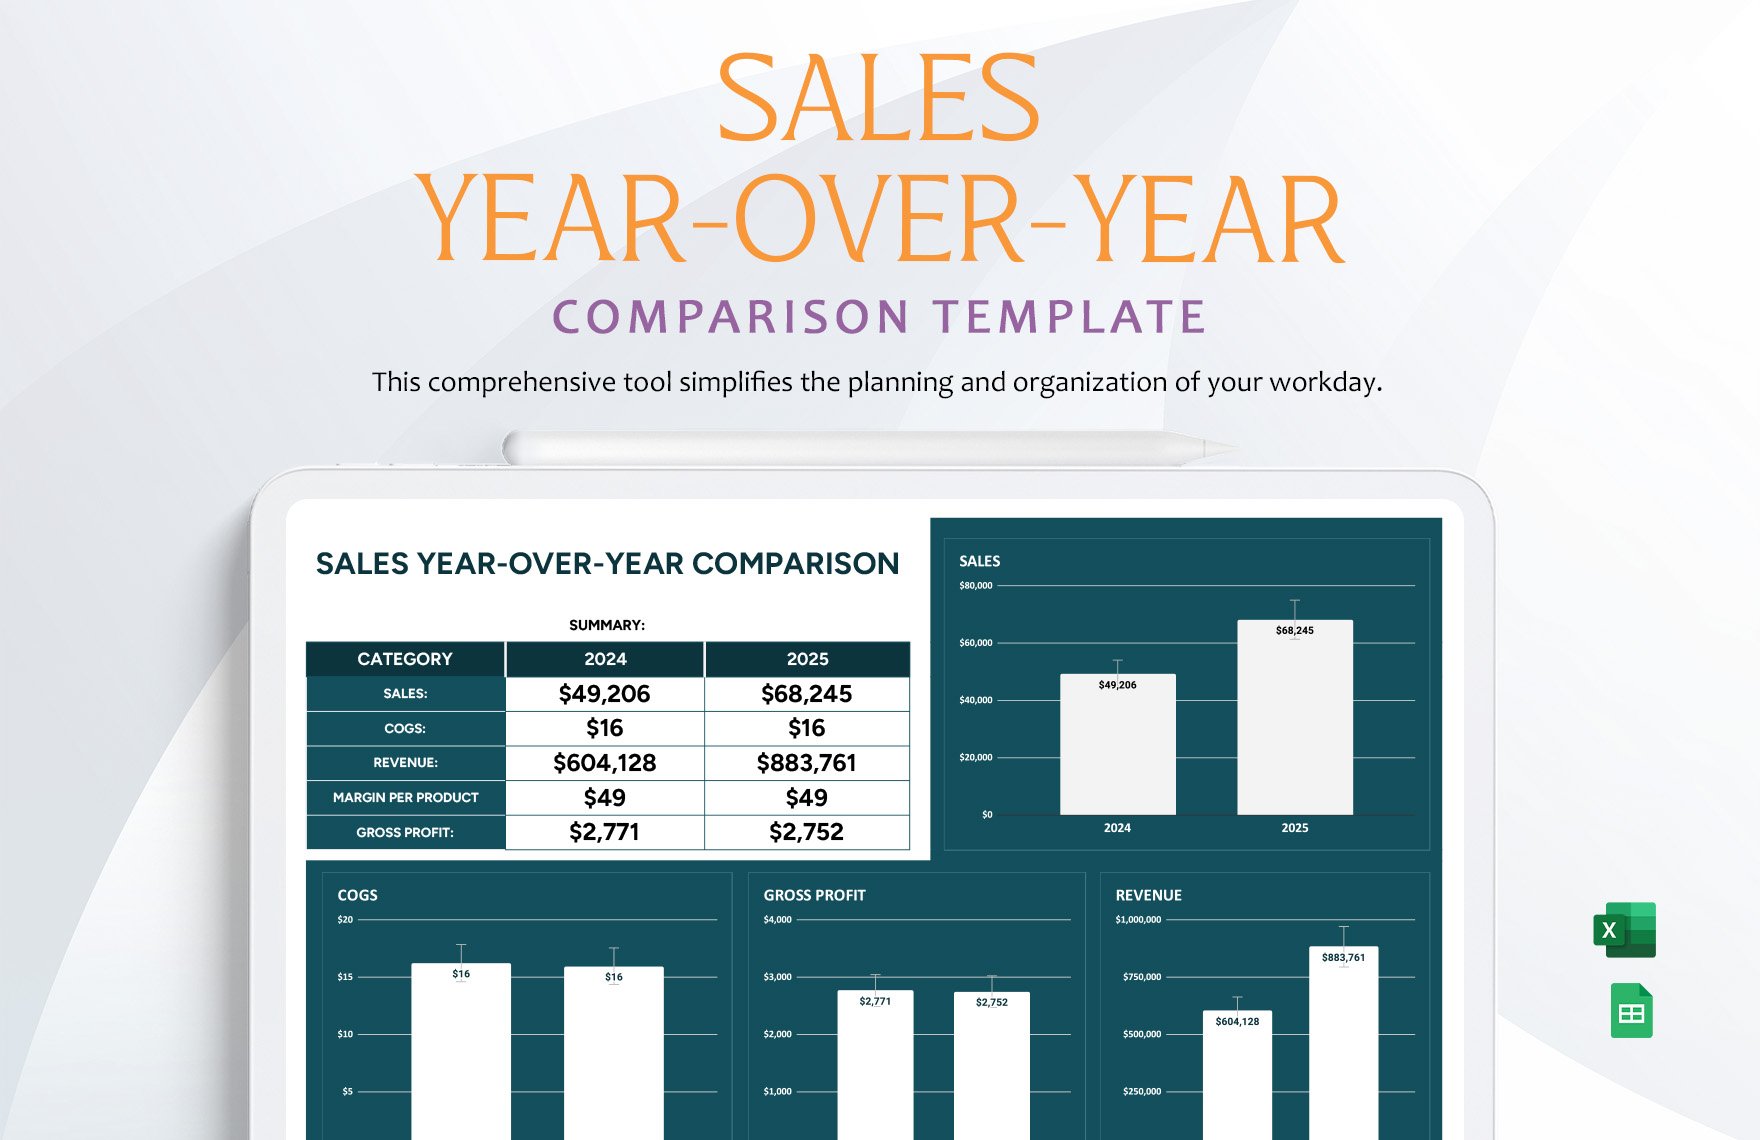 Sales Year-over-Year Comparison Template